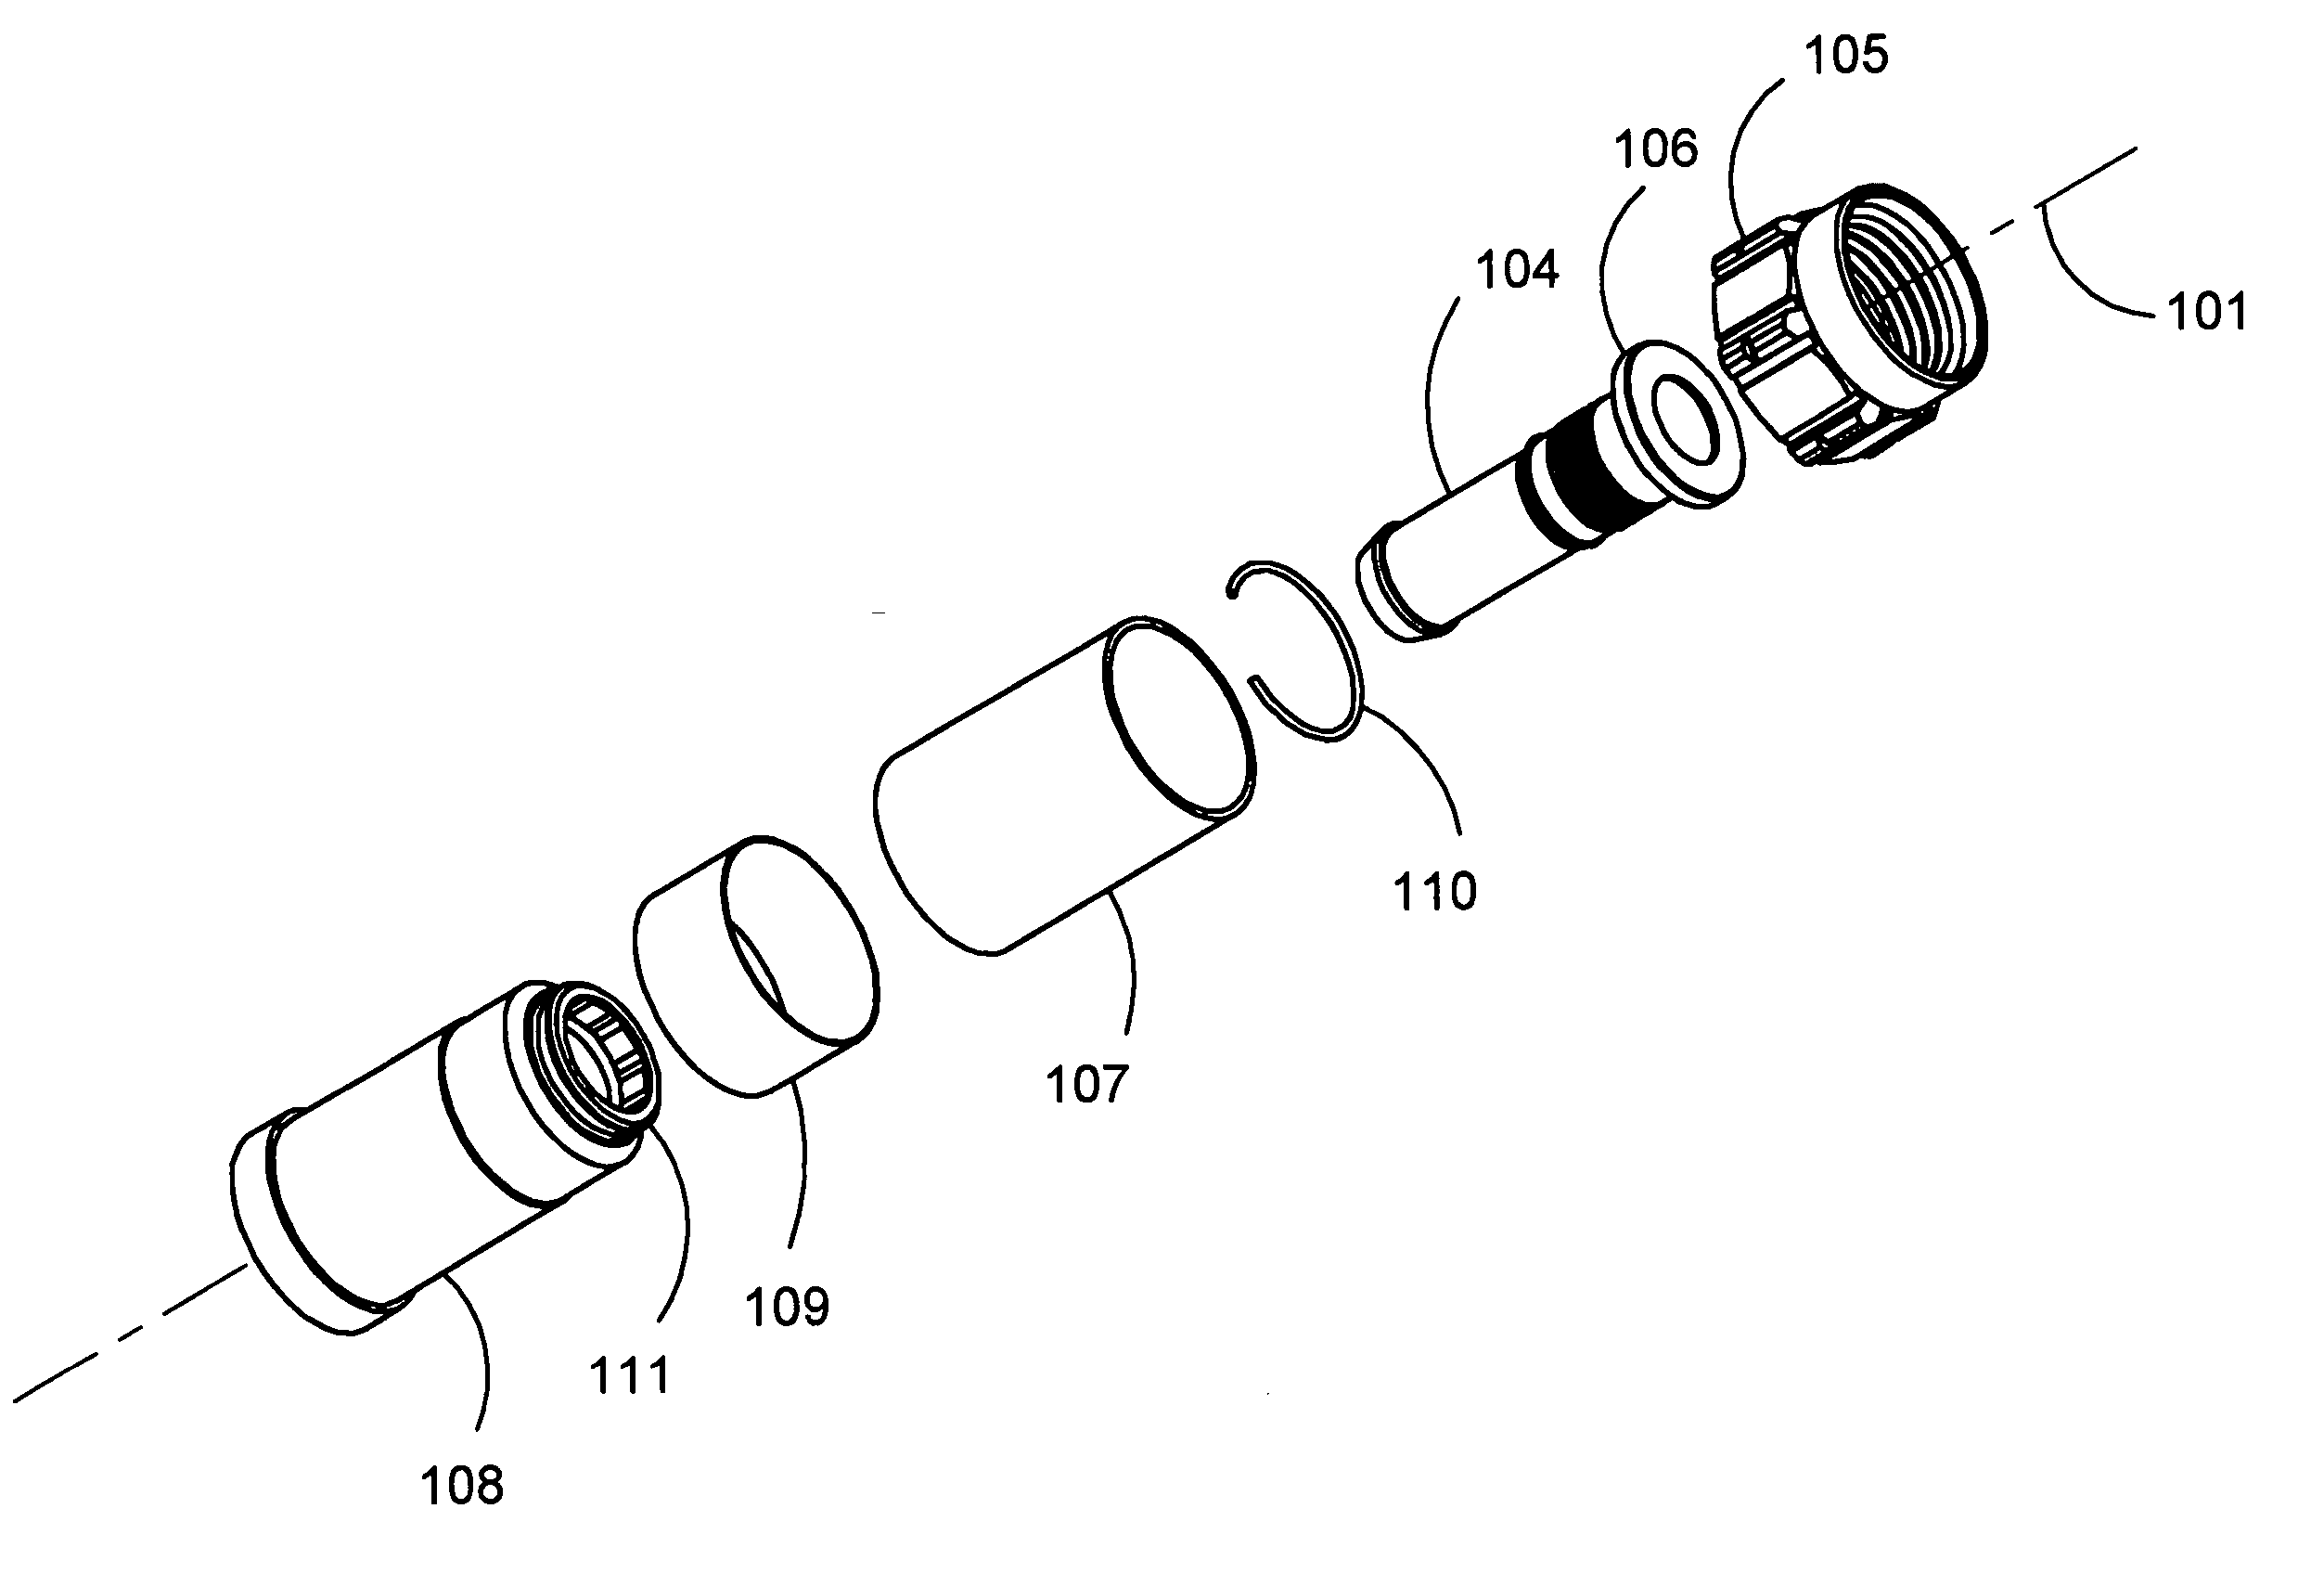 Coaxial cable connector with grounding member